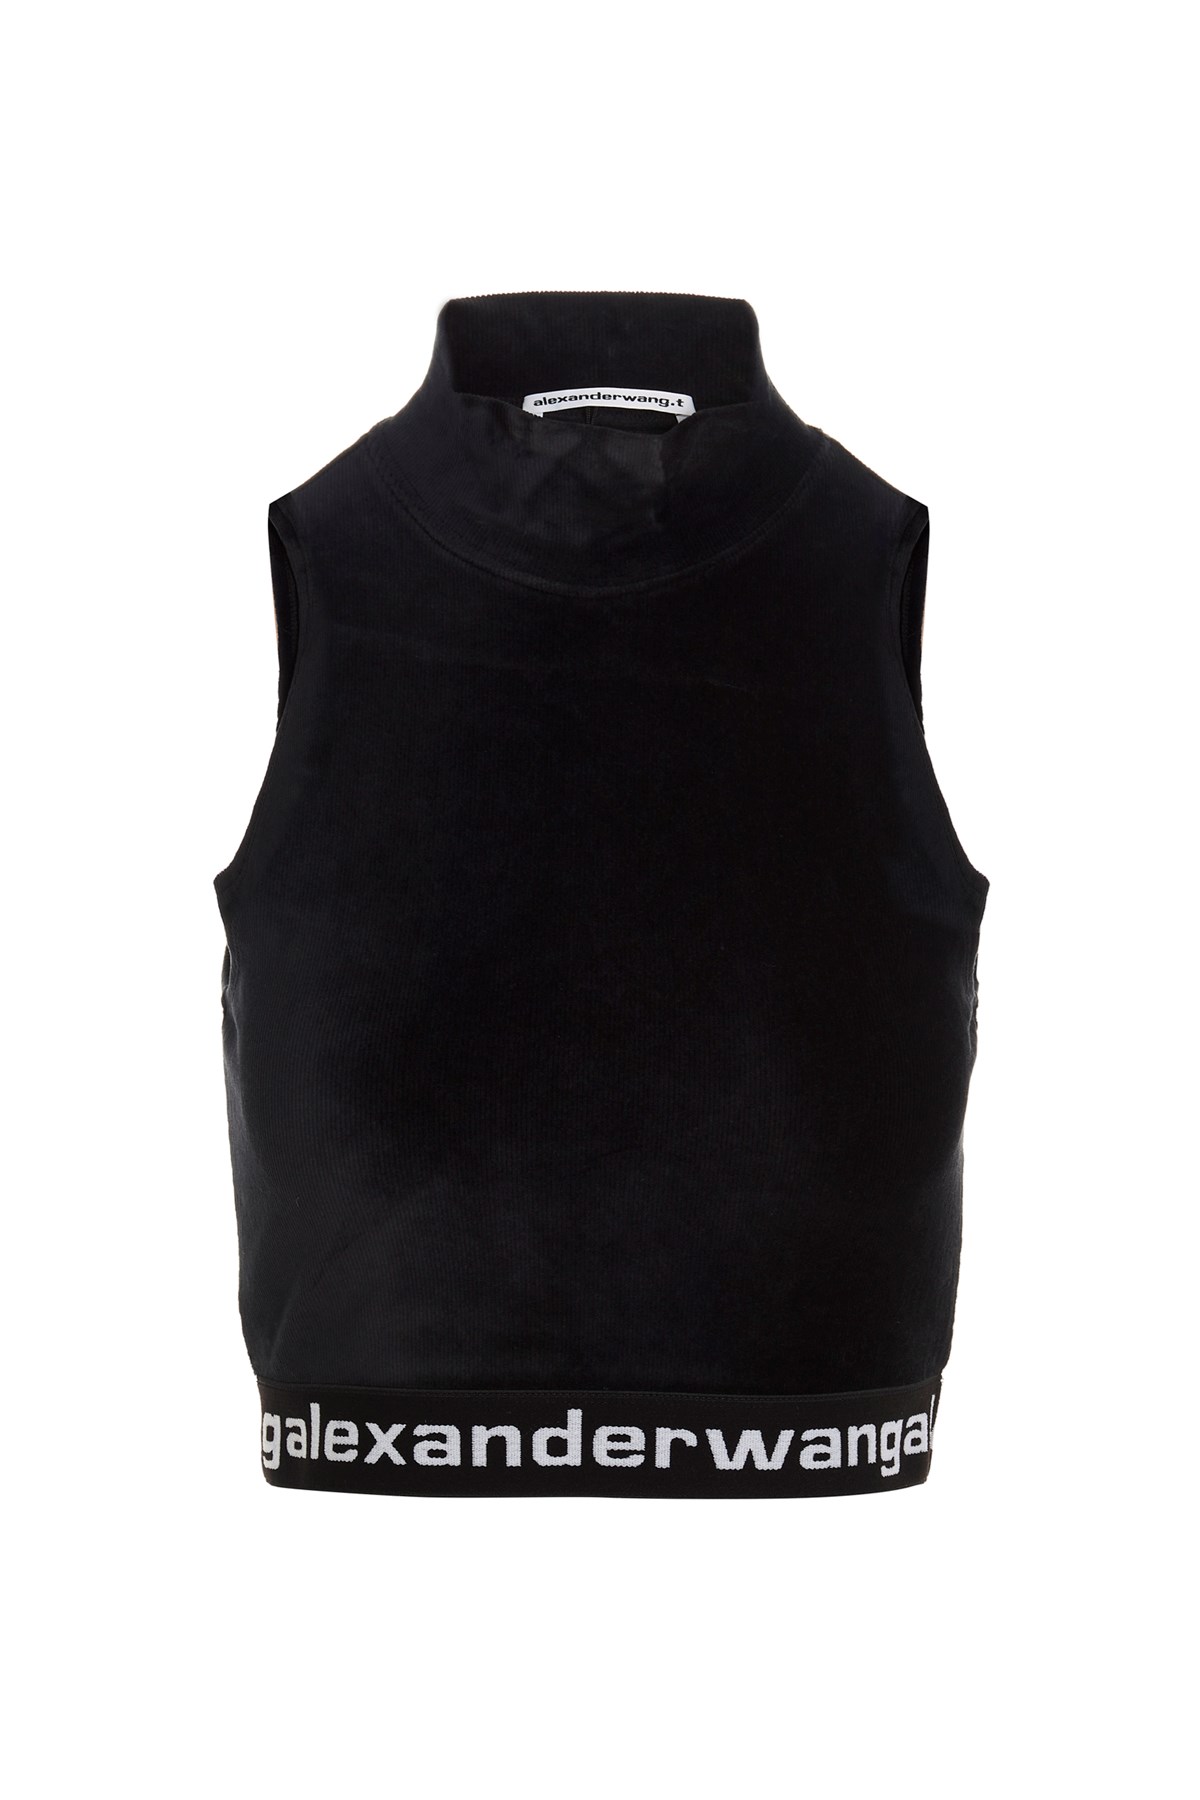 T BY ALEXANDER WANG Ribbed Corduroy Top